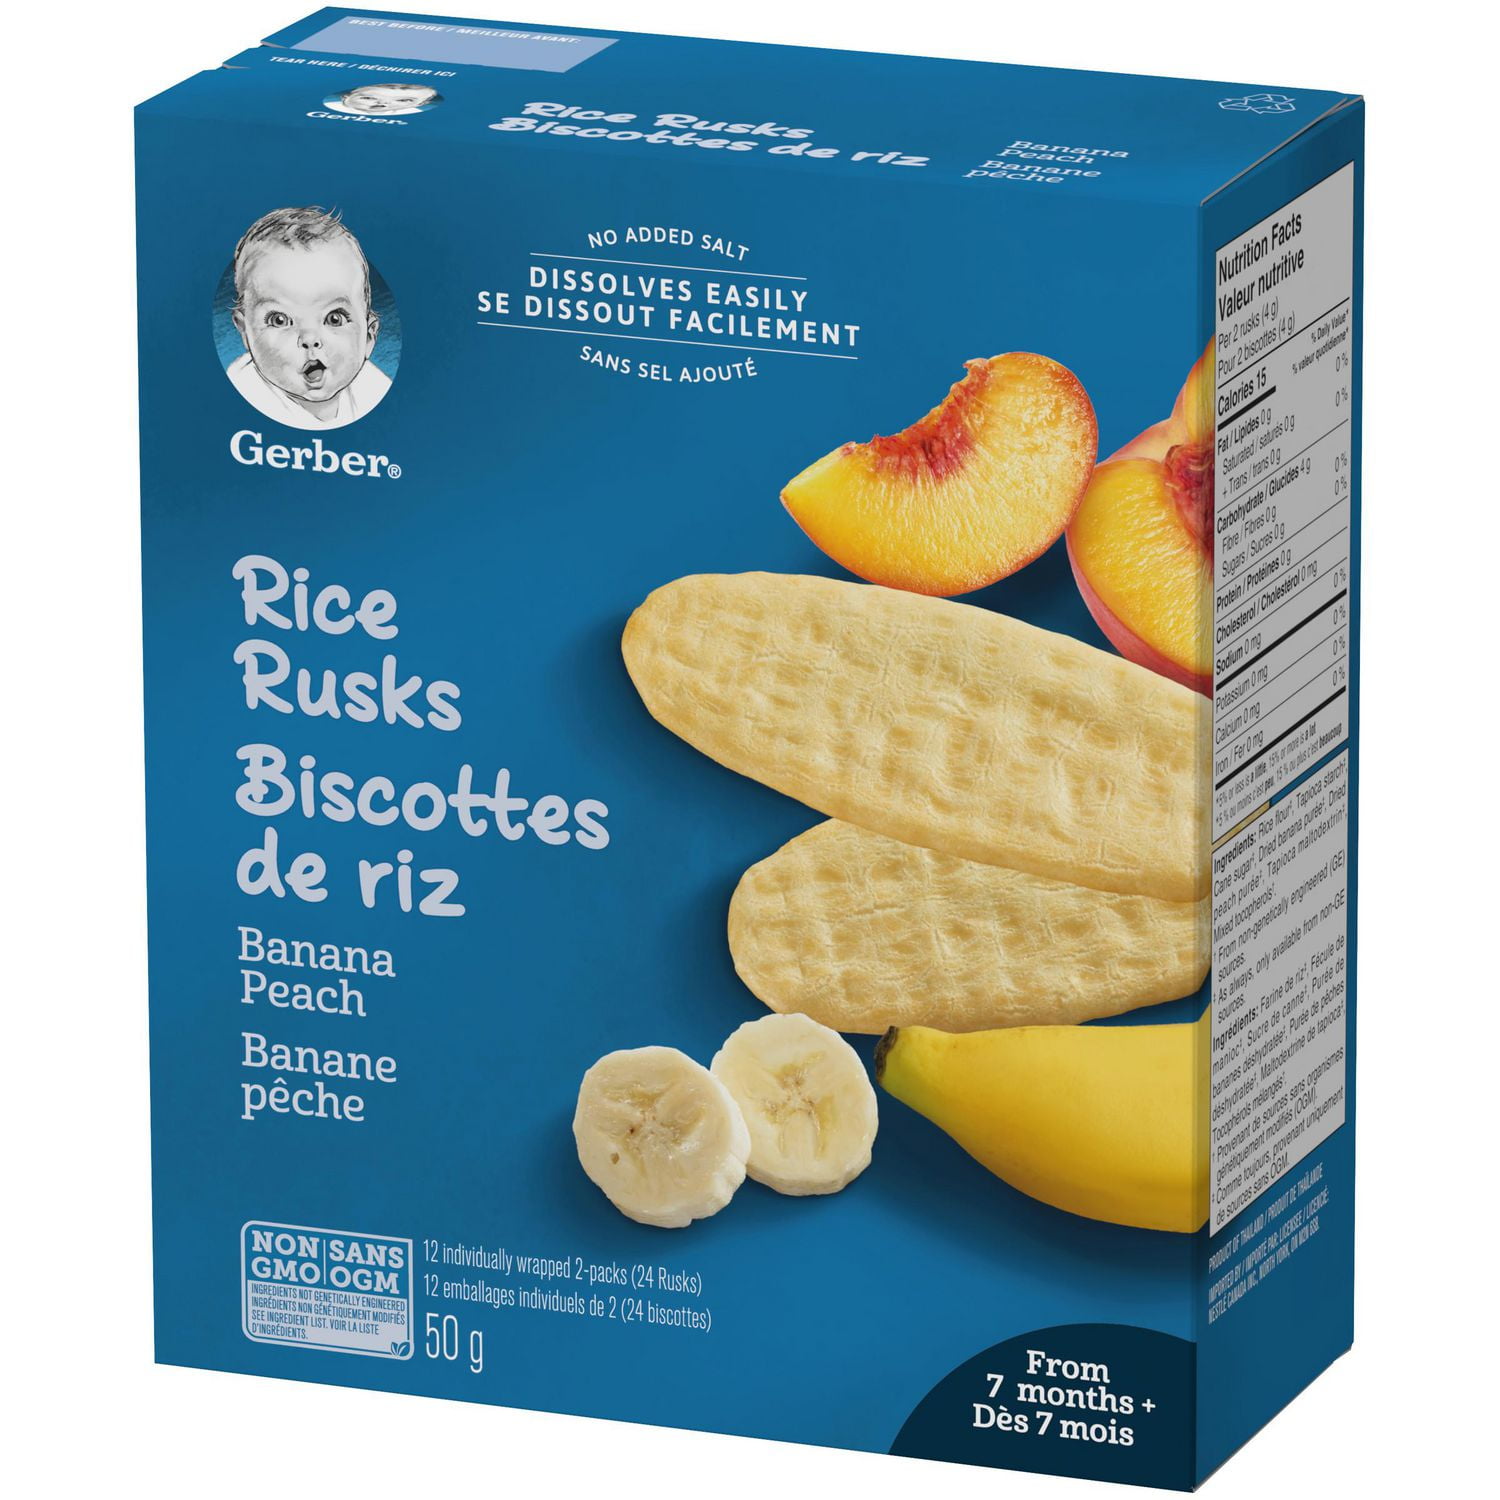 GERBER® Stage 1 Rice Baby Cereal 227 g, 227 GR 